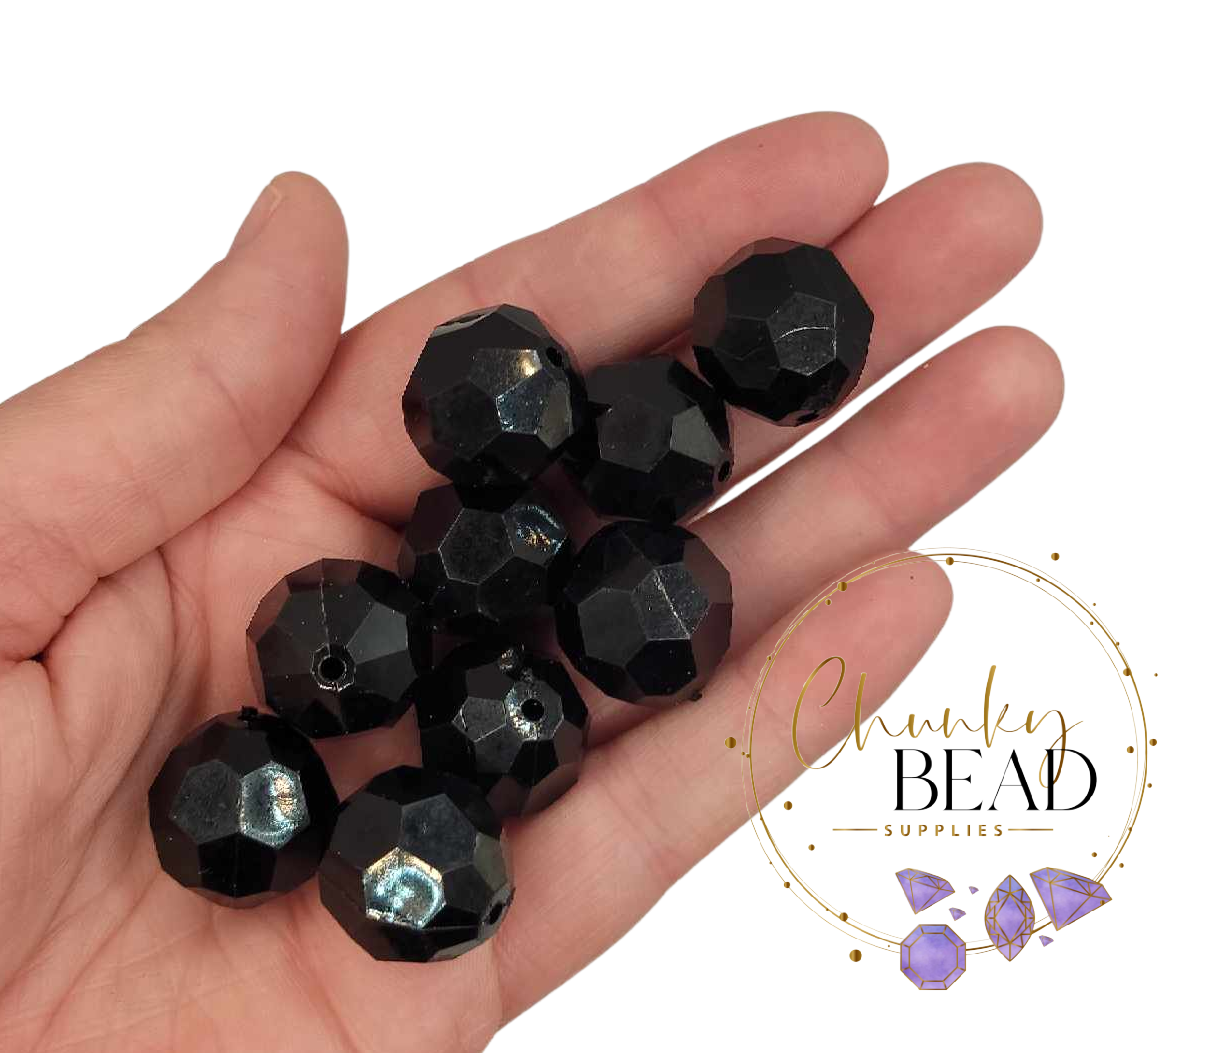 20mm "Black" Faceted Acrylic Beads